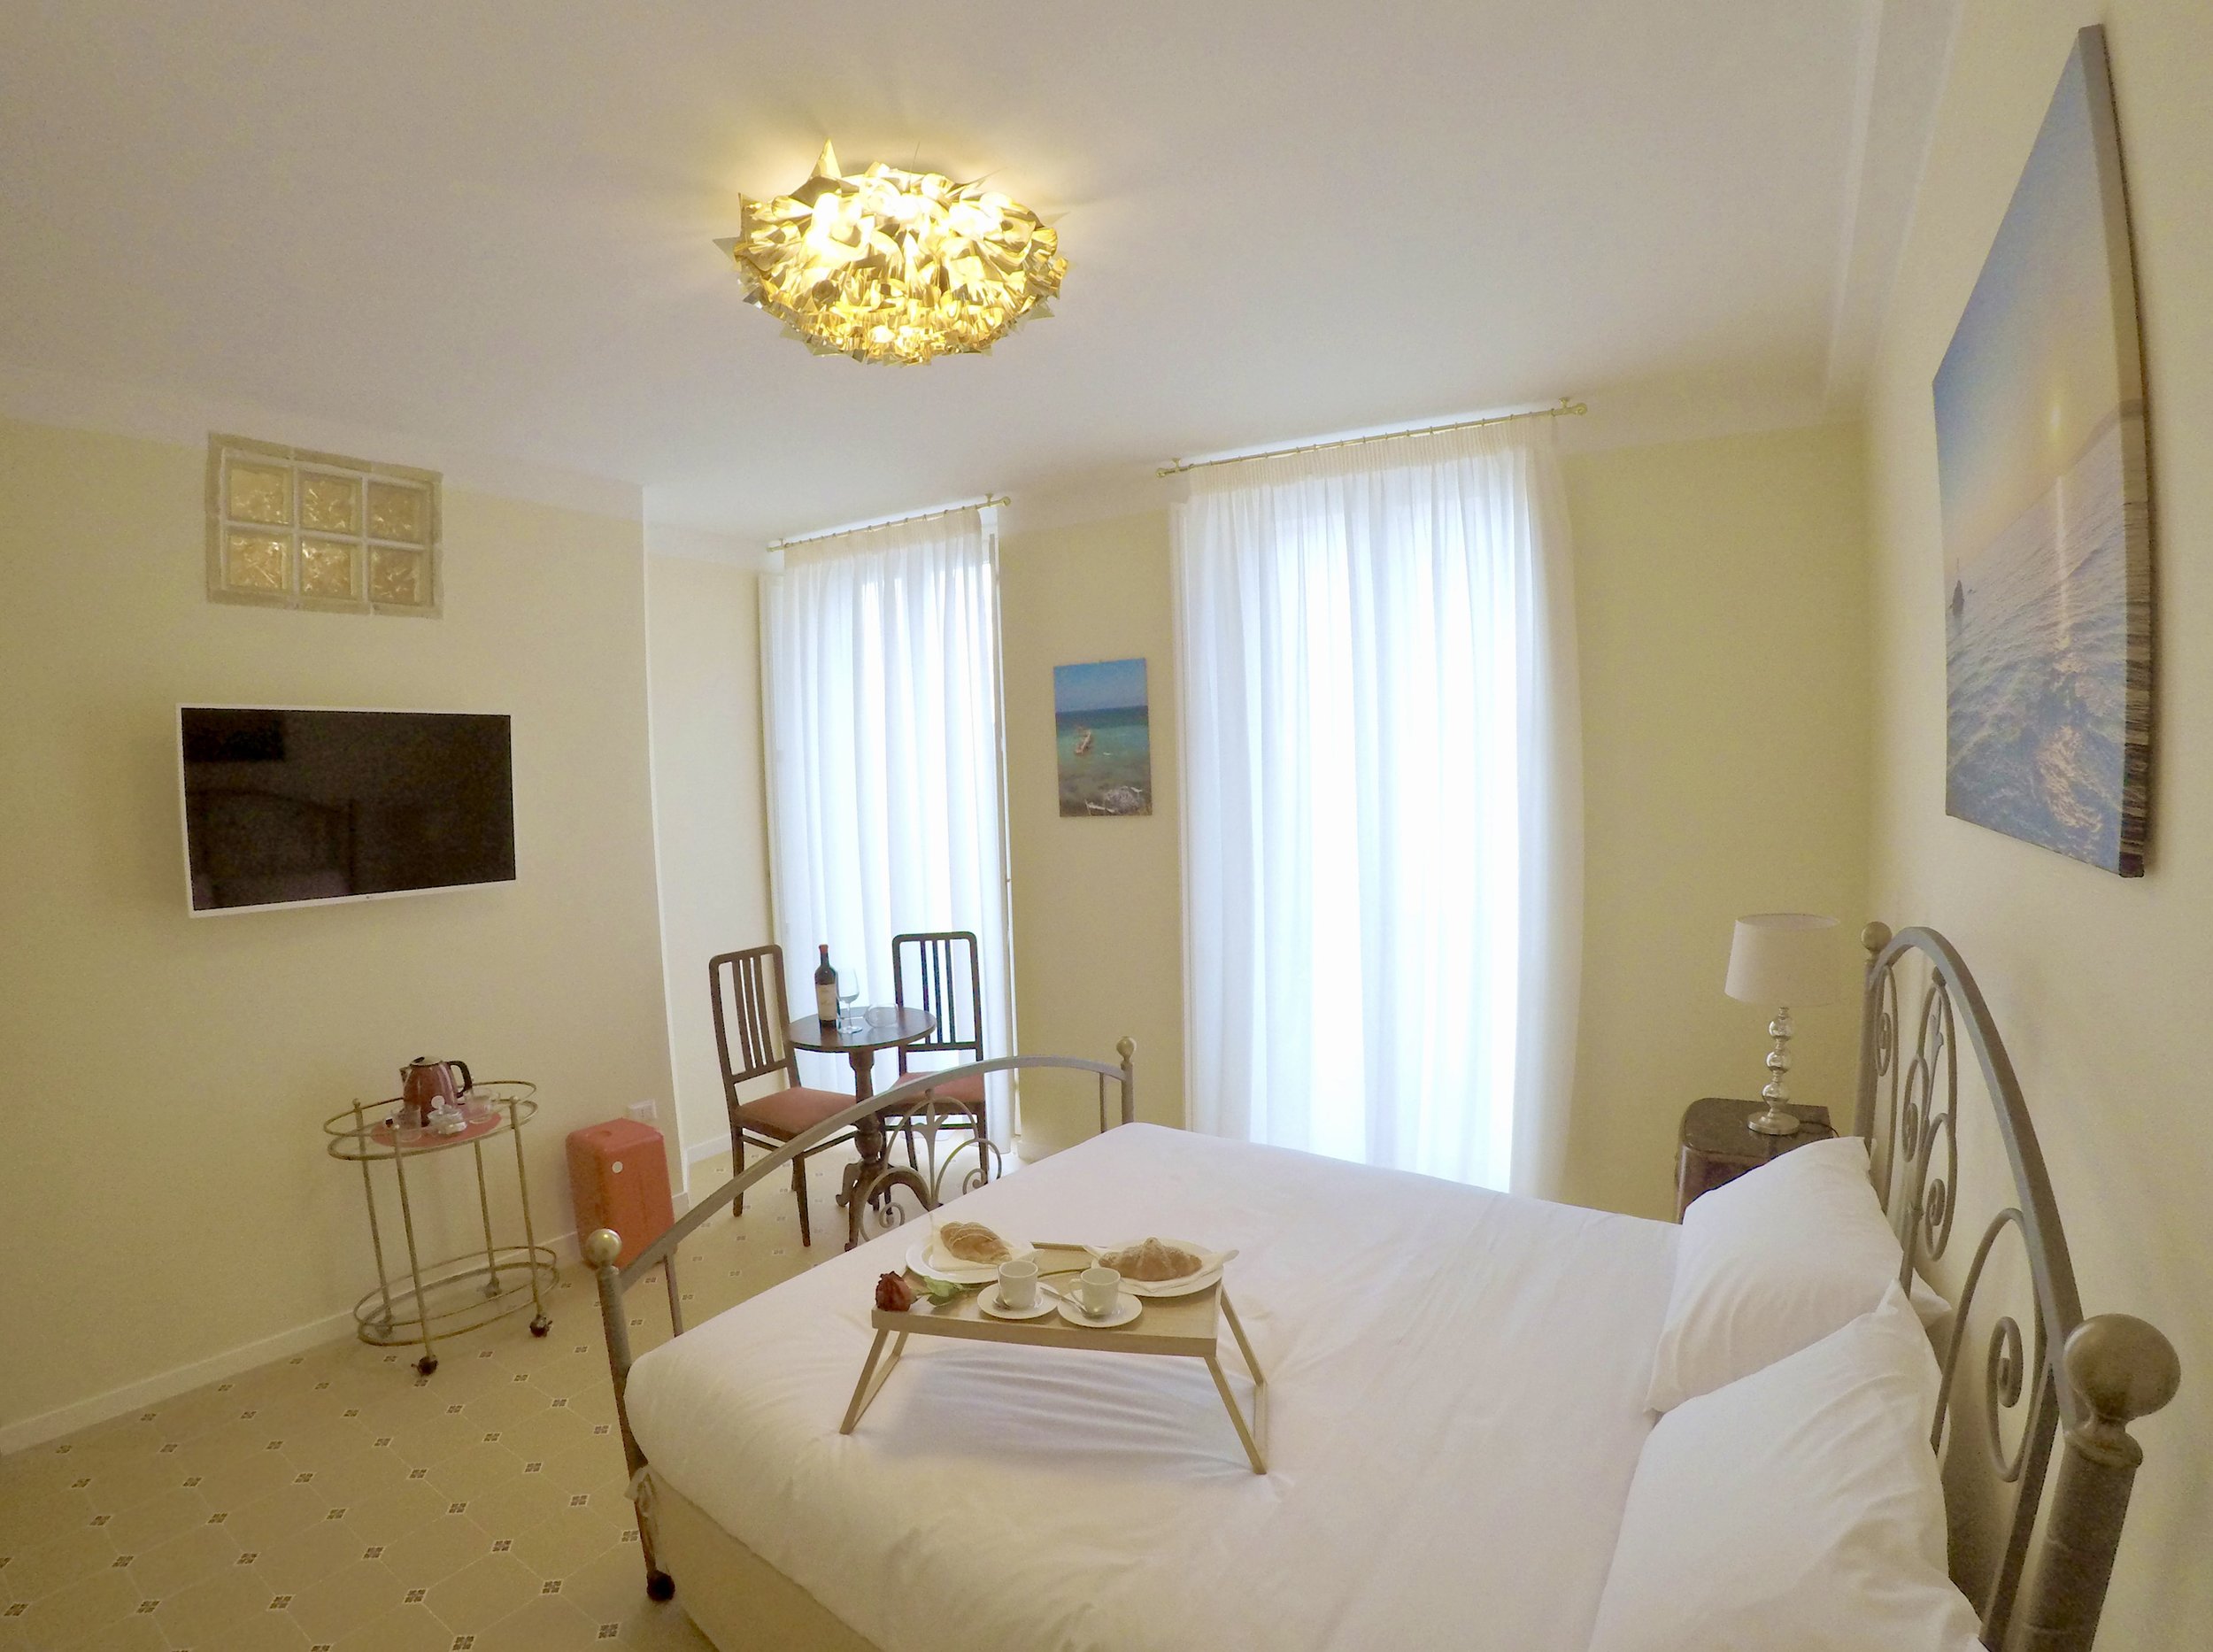 Overview of Deluxe Double room with bed and flatscreen TV